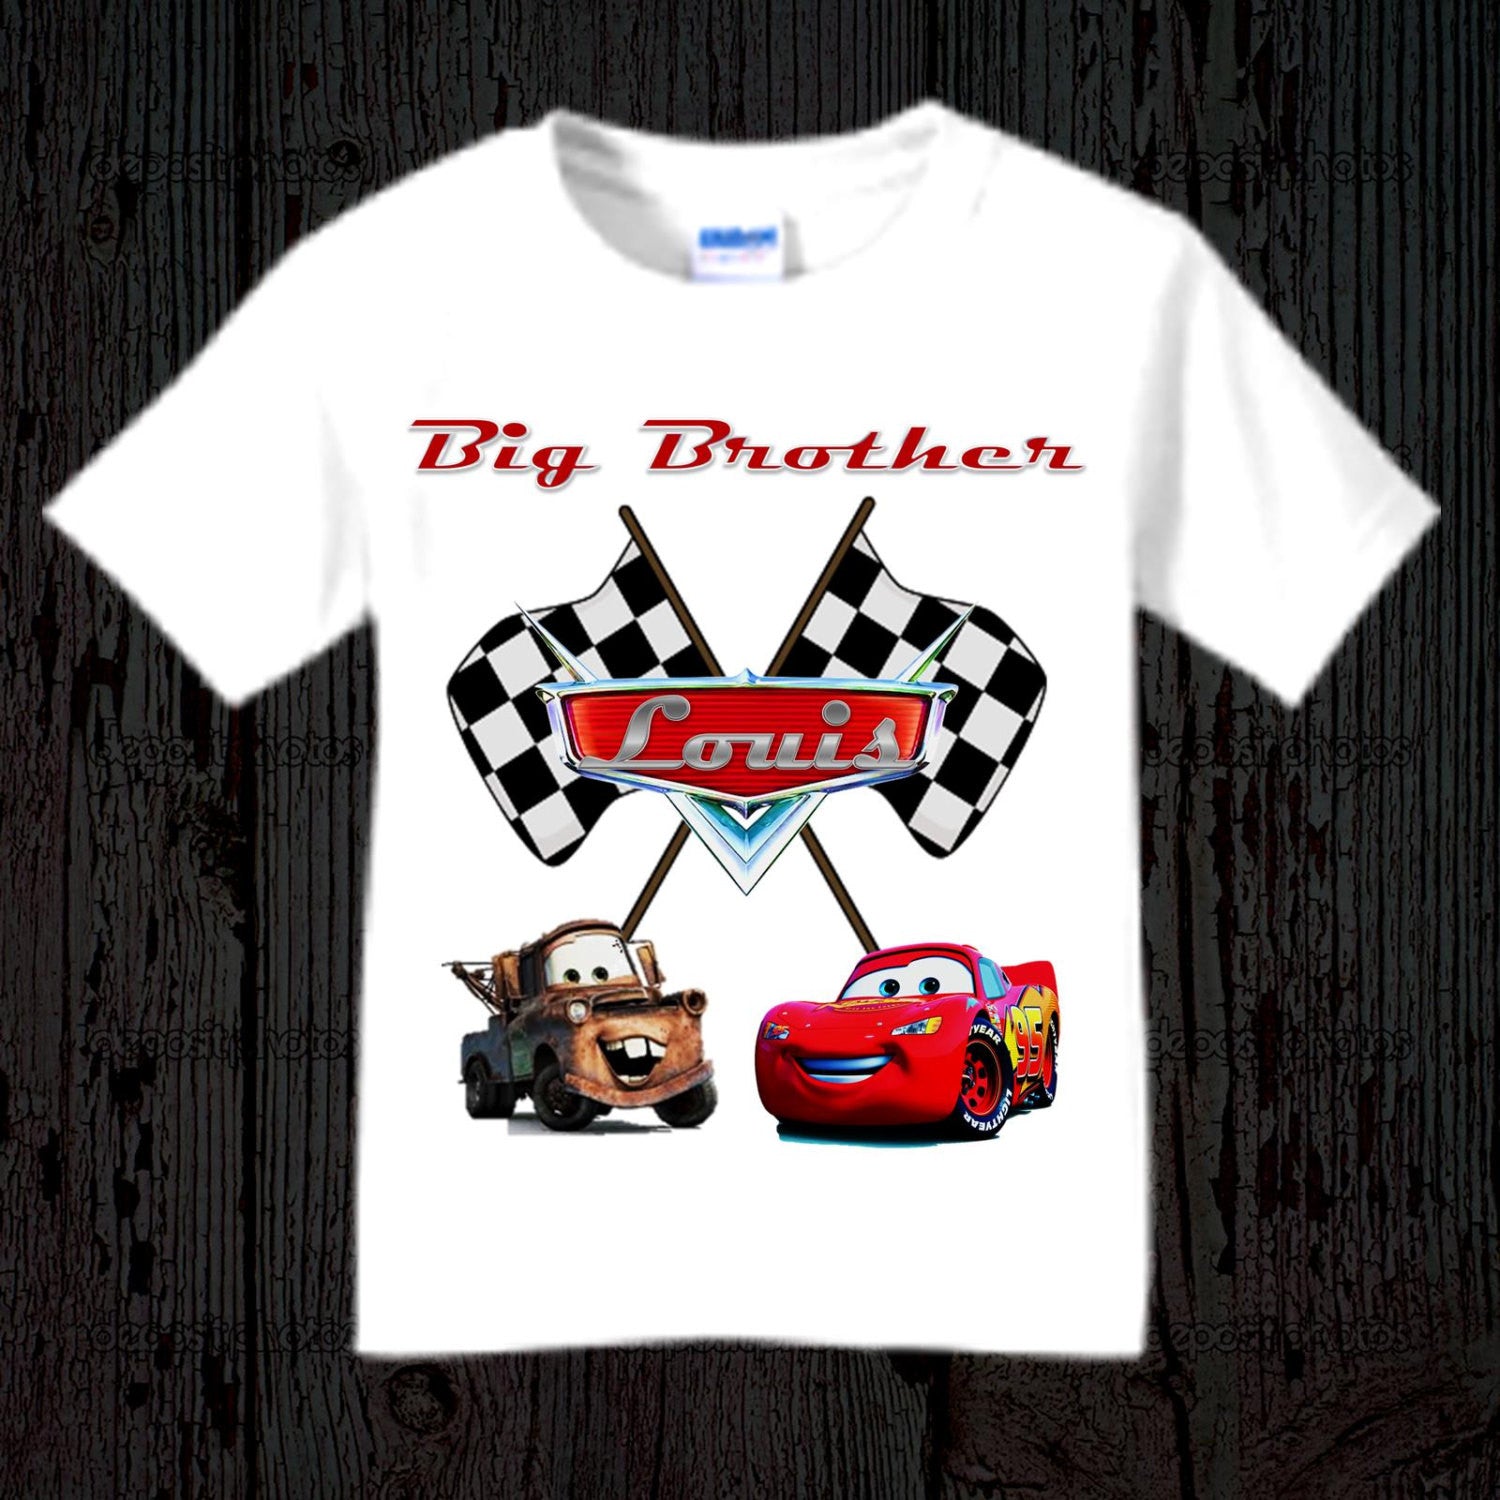 lightning mcqueen birthday outfit